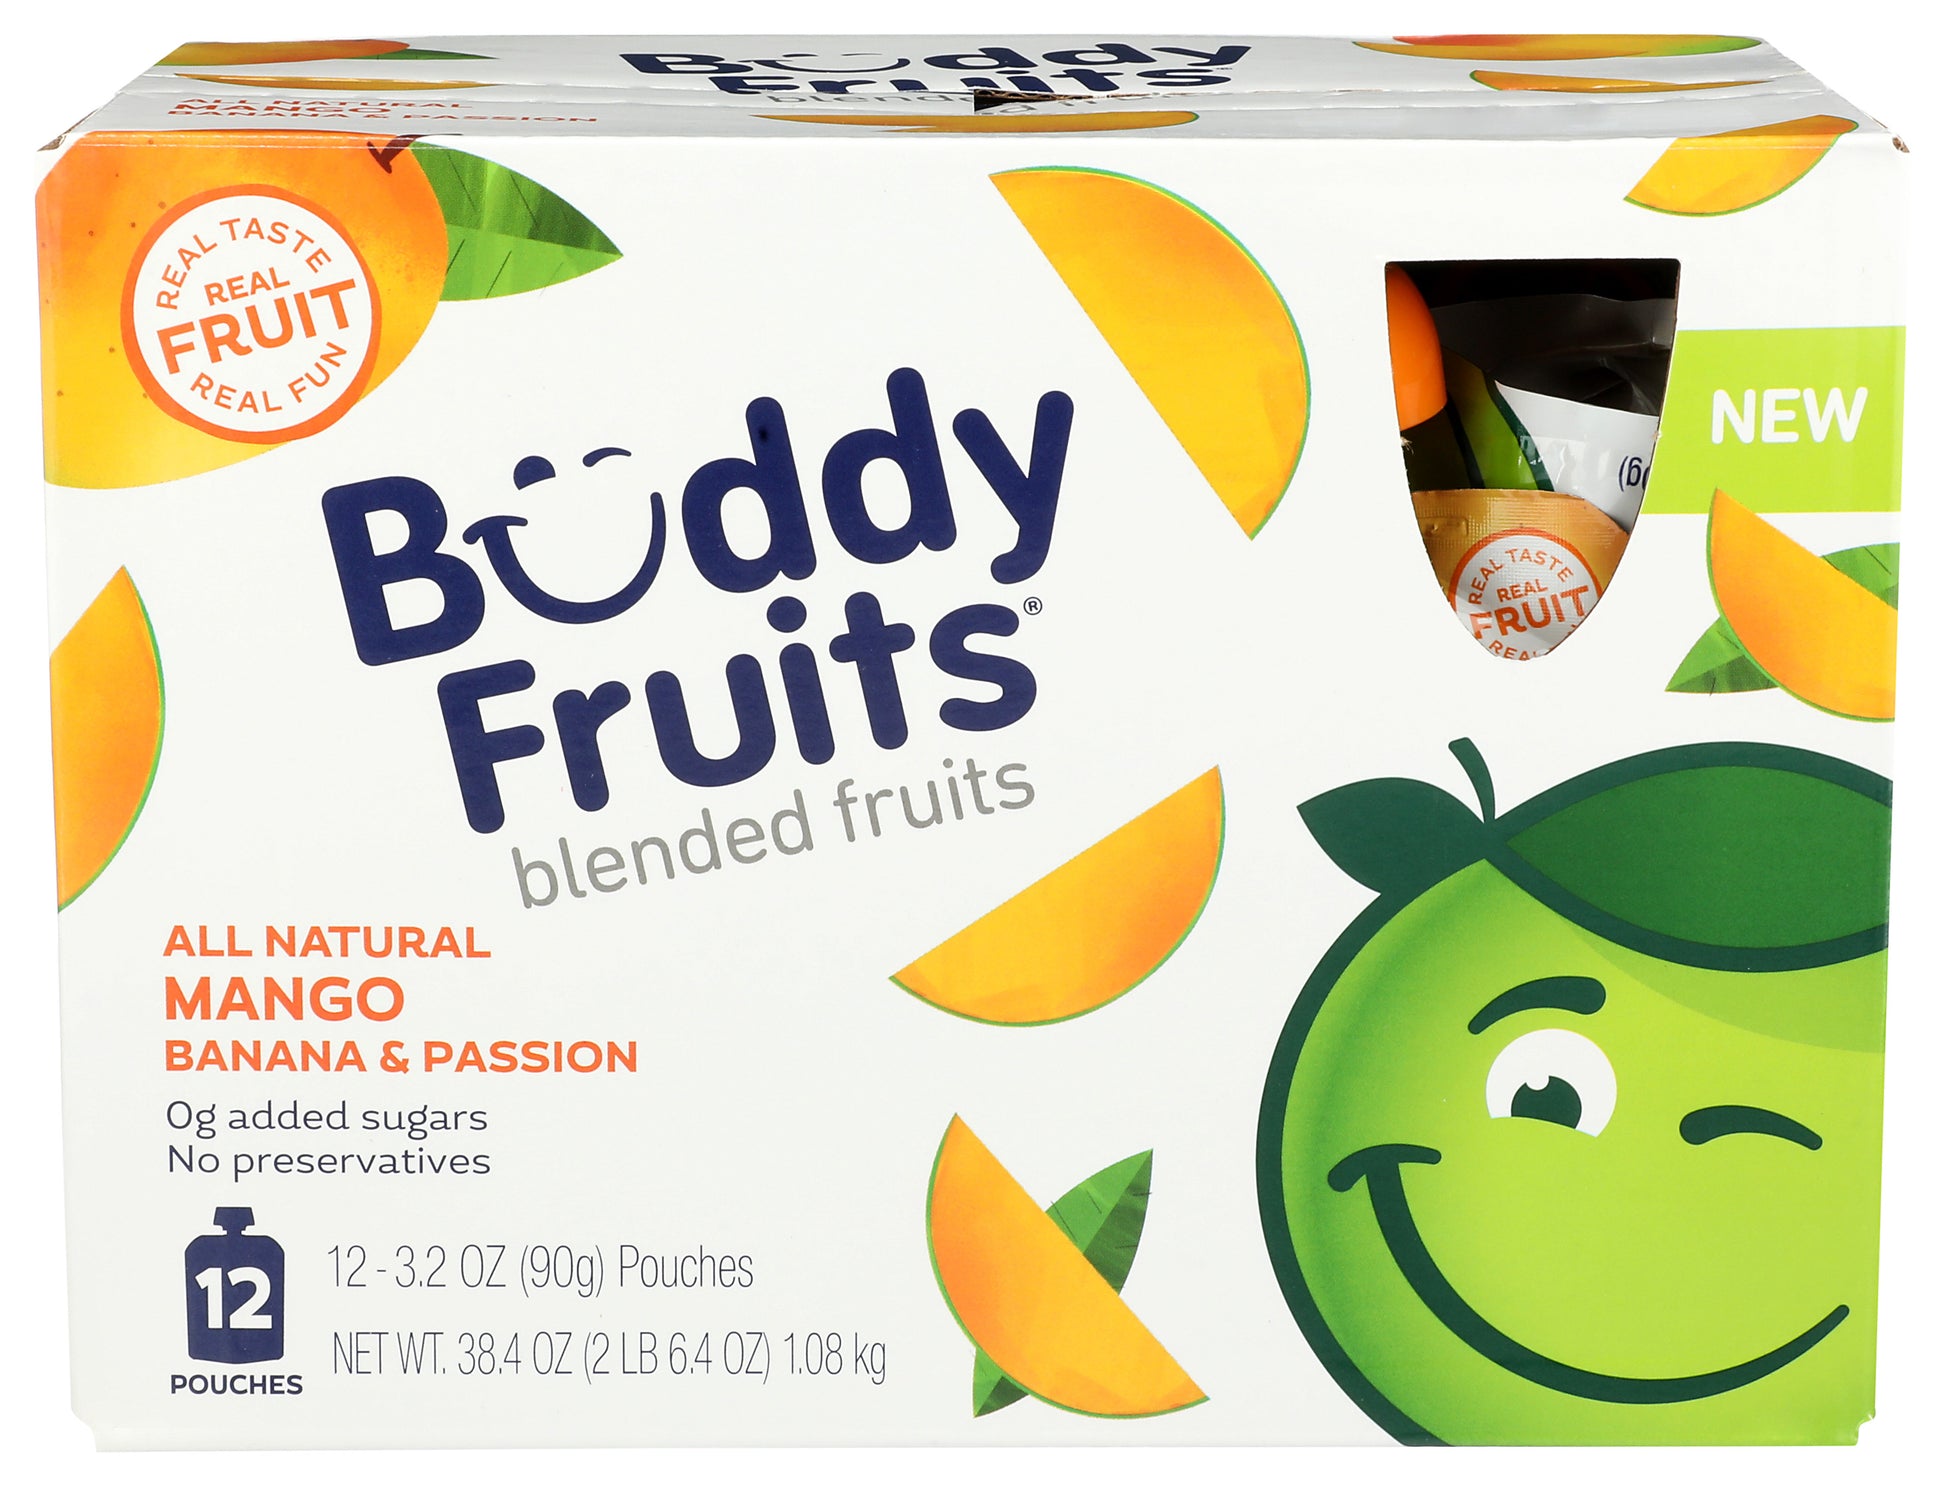 Packaging for 12 pack of Buddy Fruits Mango, Banana, & Passionfruit fruit pouch.